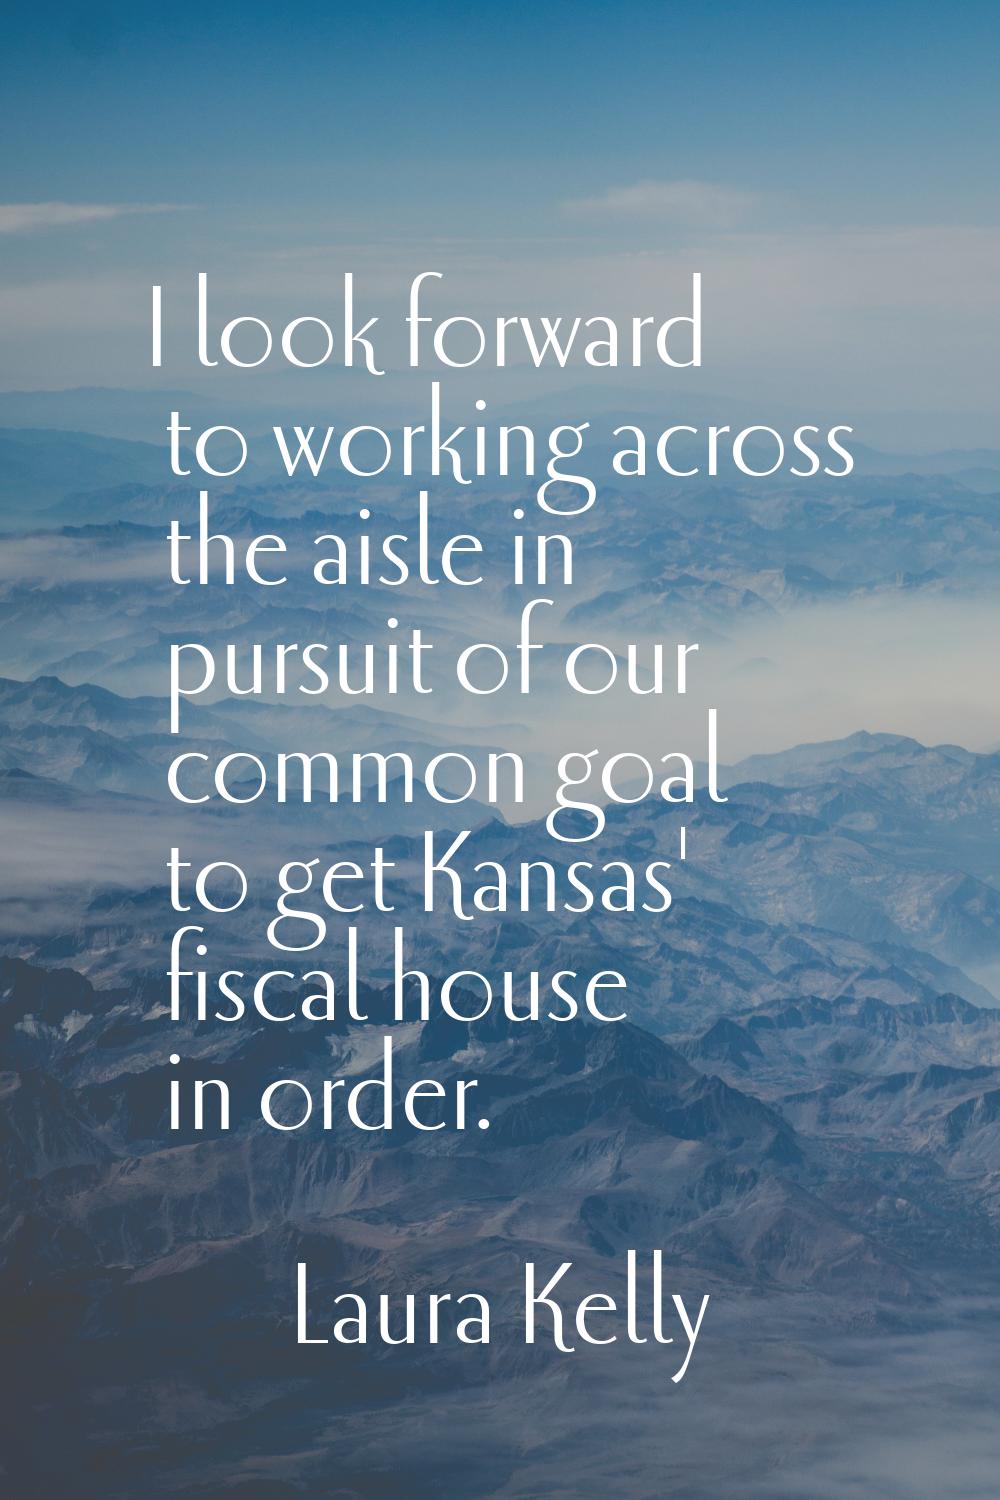 I look forward to working across the aisle in pursuit of our common goal to get Kansas' fiscal hous